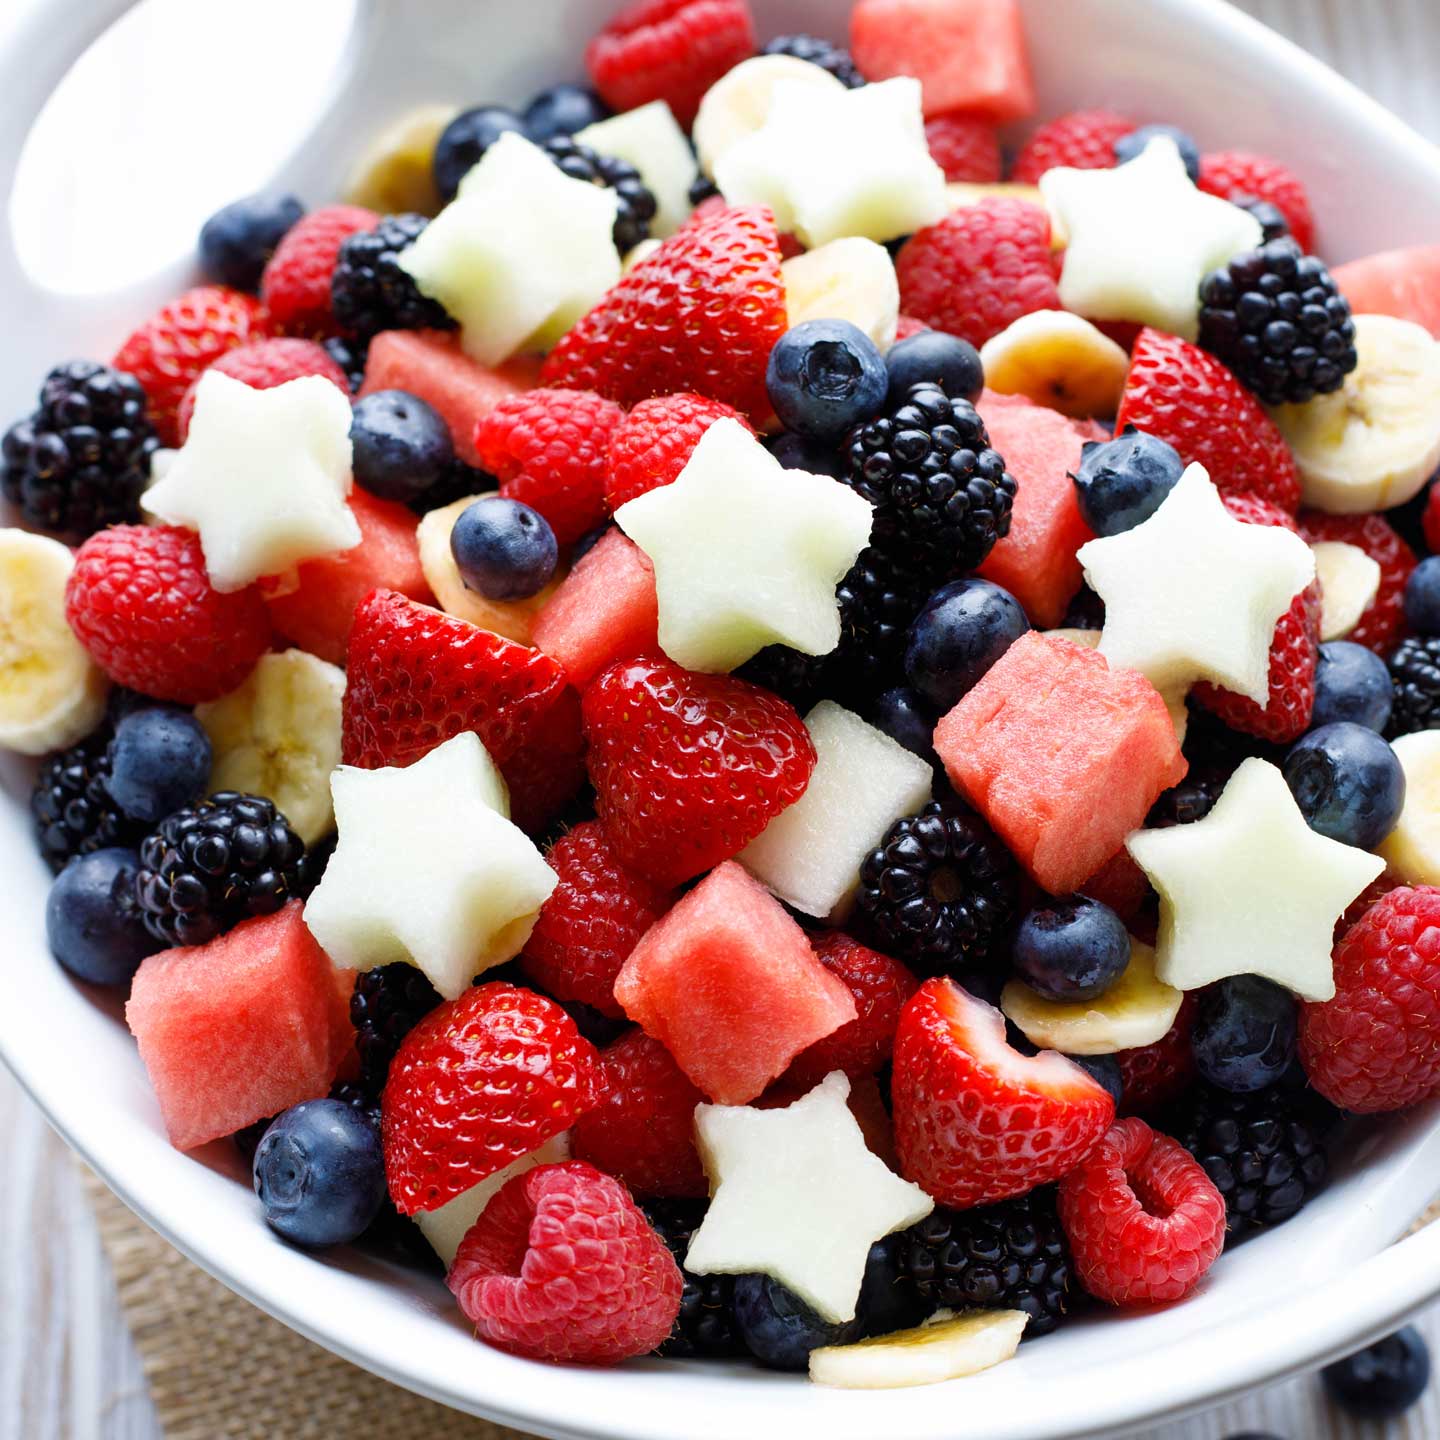 large bowl of red white and blue summer fruit, topped with white melon cut into stars